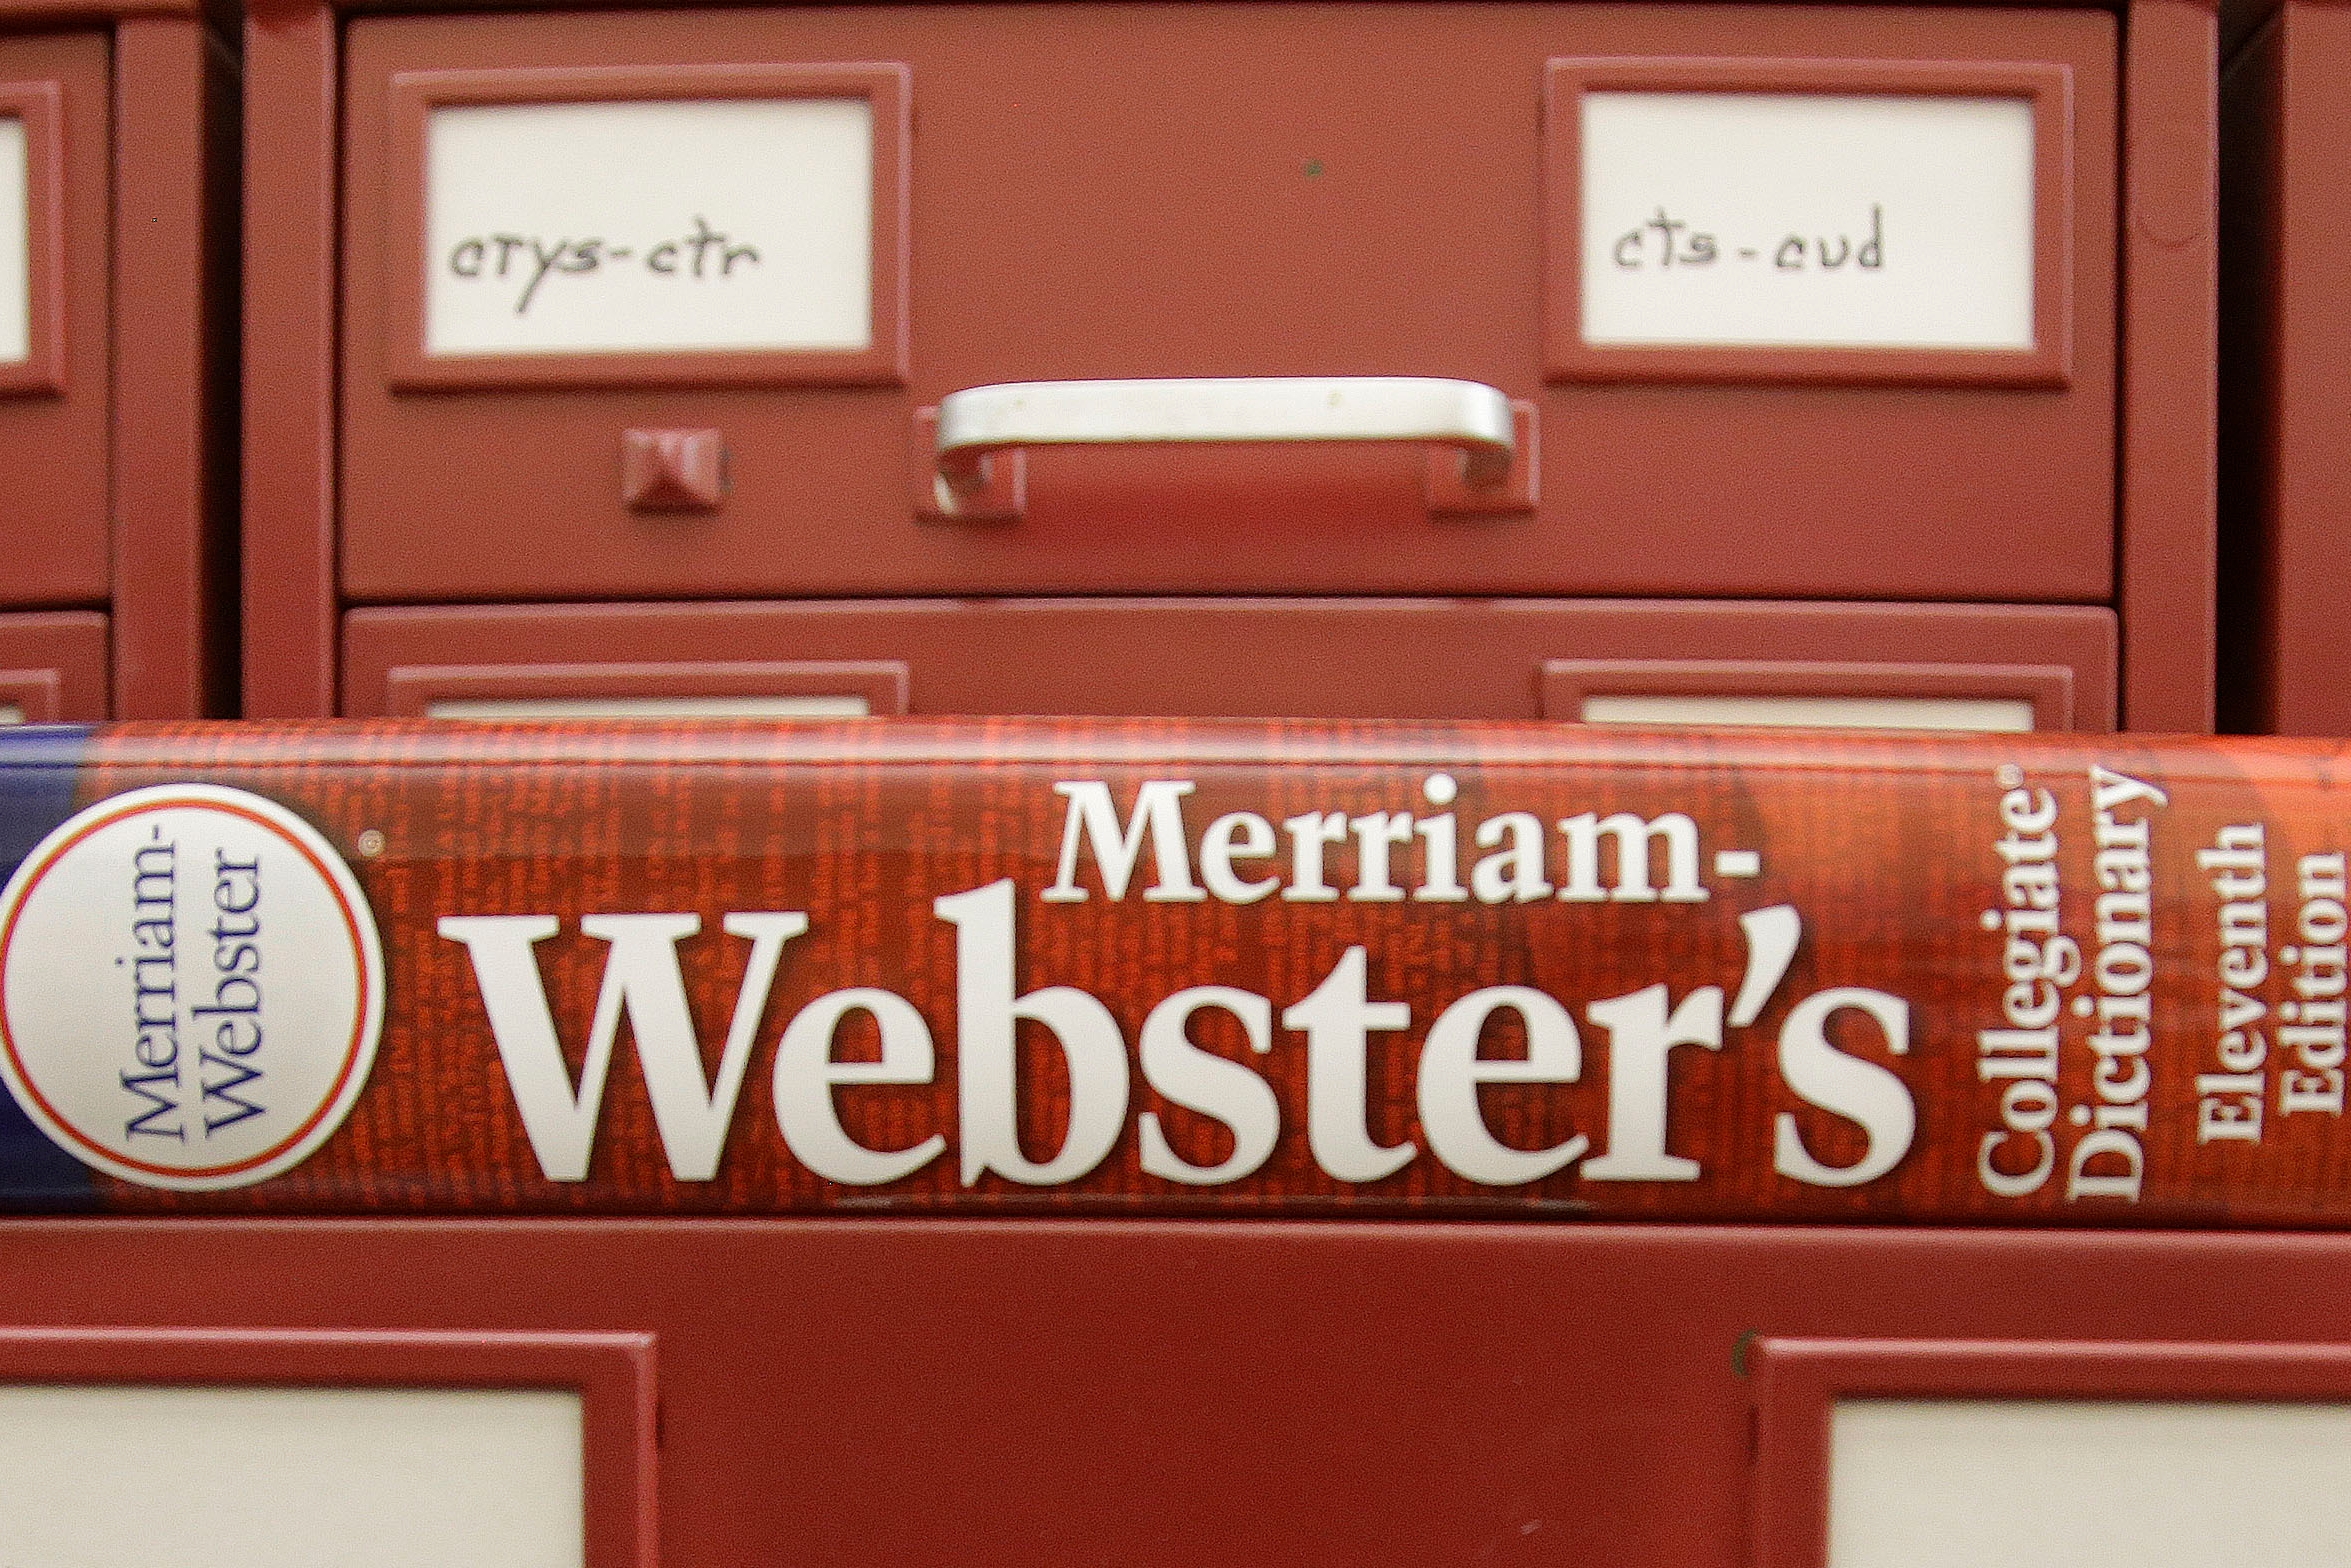 What's Merriam-Webster's word of the year for 2023? Hint: Be true